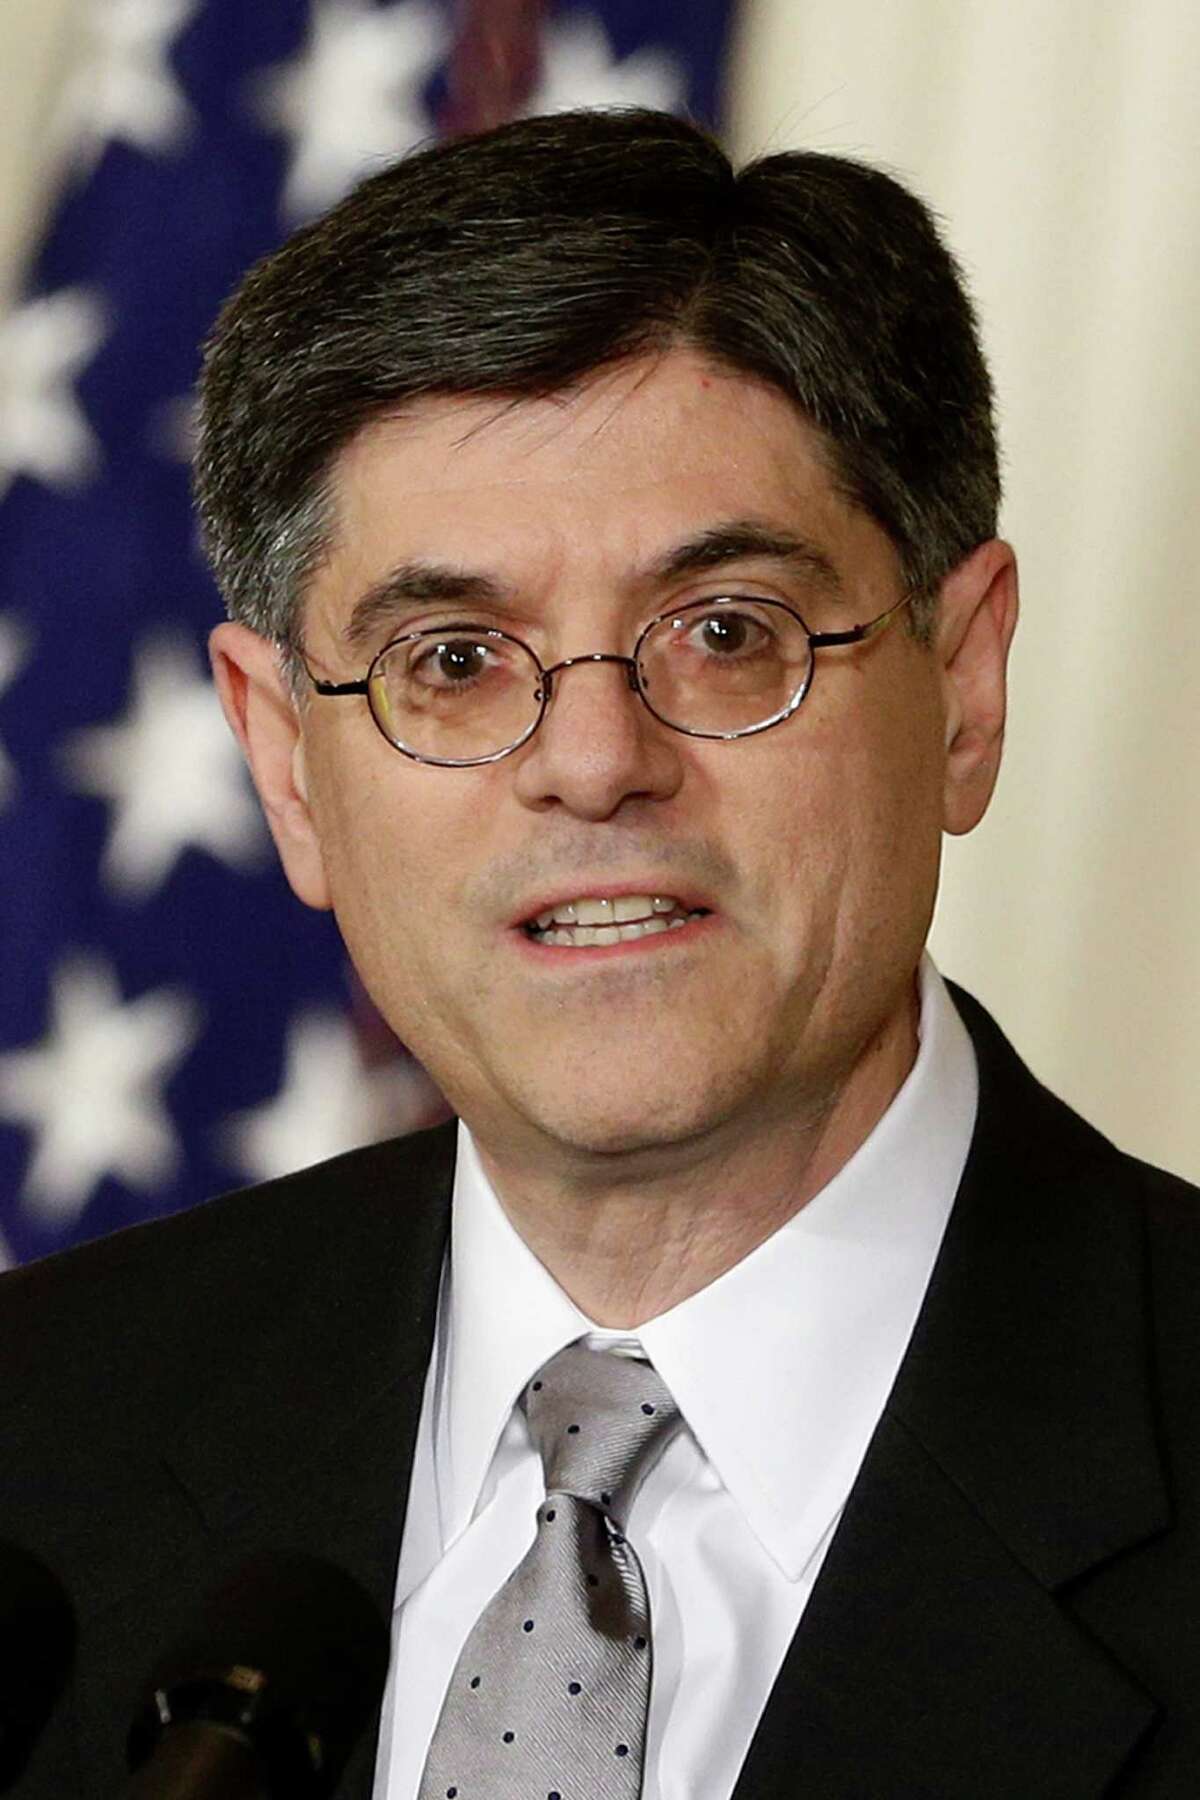 Jack Lew, the current White House chief of staff, speaks in the East Room of the White House in Washington, Thursday, Jan. 10, 2013, where President Barack Obama announced Lew as his nominee as the next Treasury Secretary. (AP Photo/Charles Dharapak)